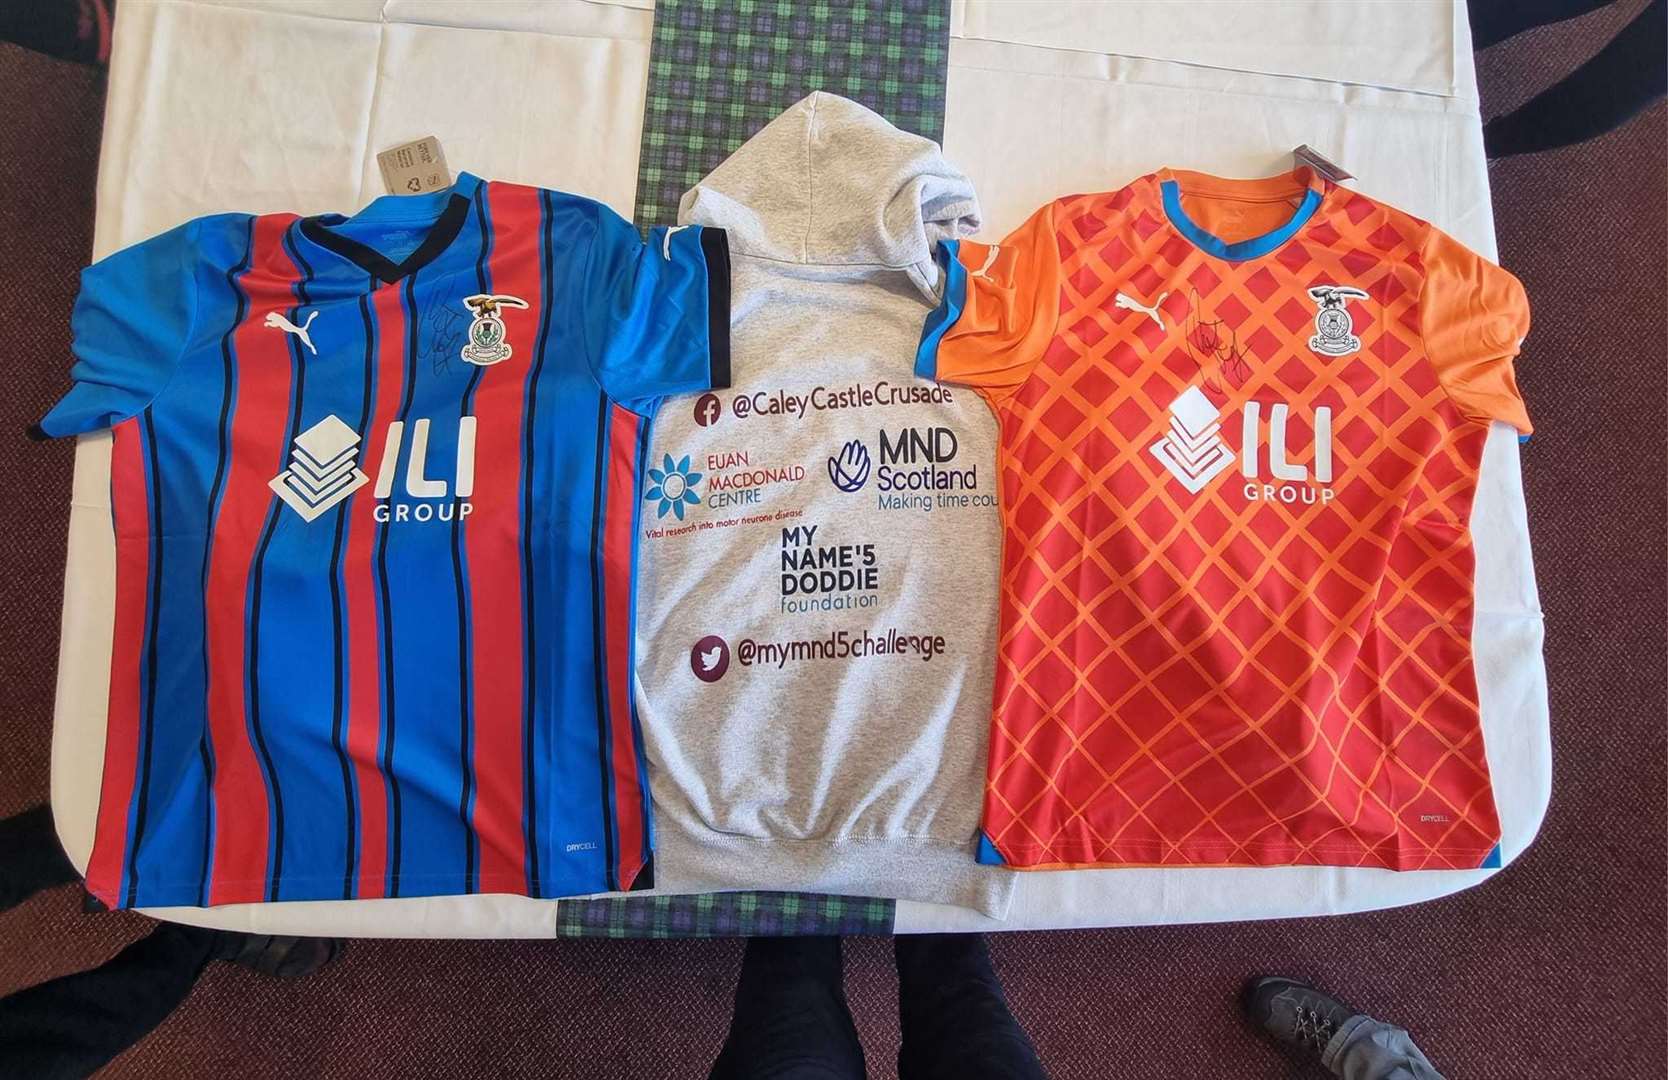 The legendary former Rangers, Everton and Scotland striker signed ICT shirts for the cause